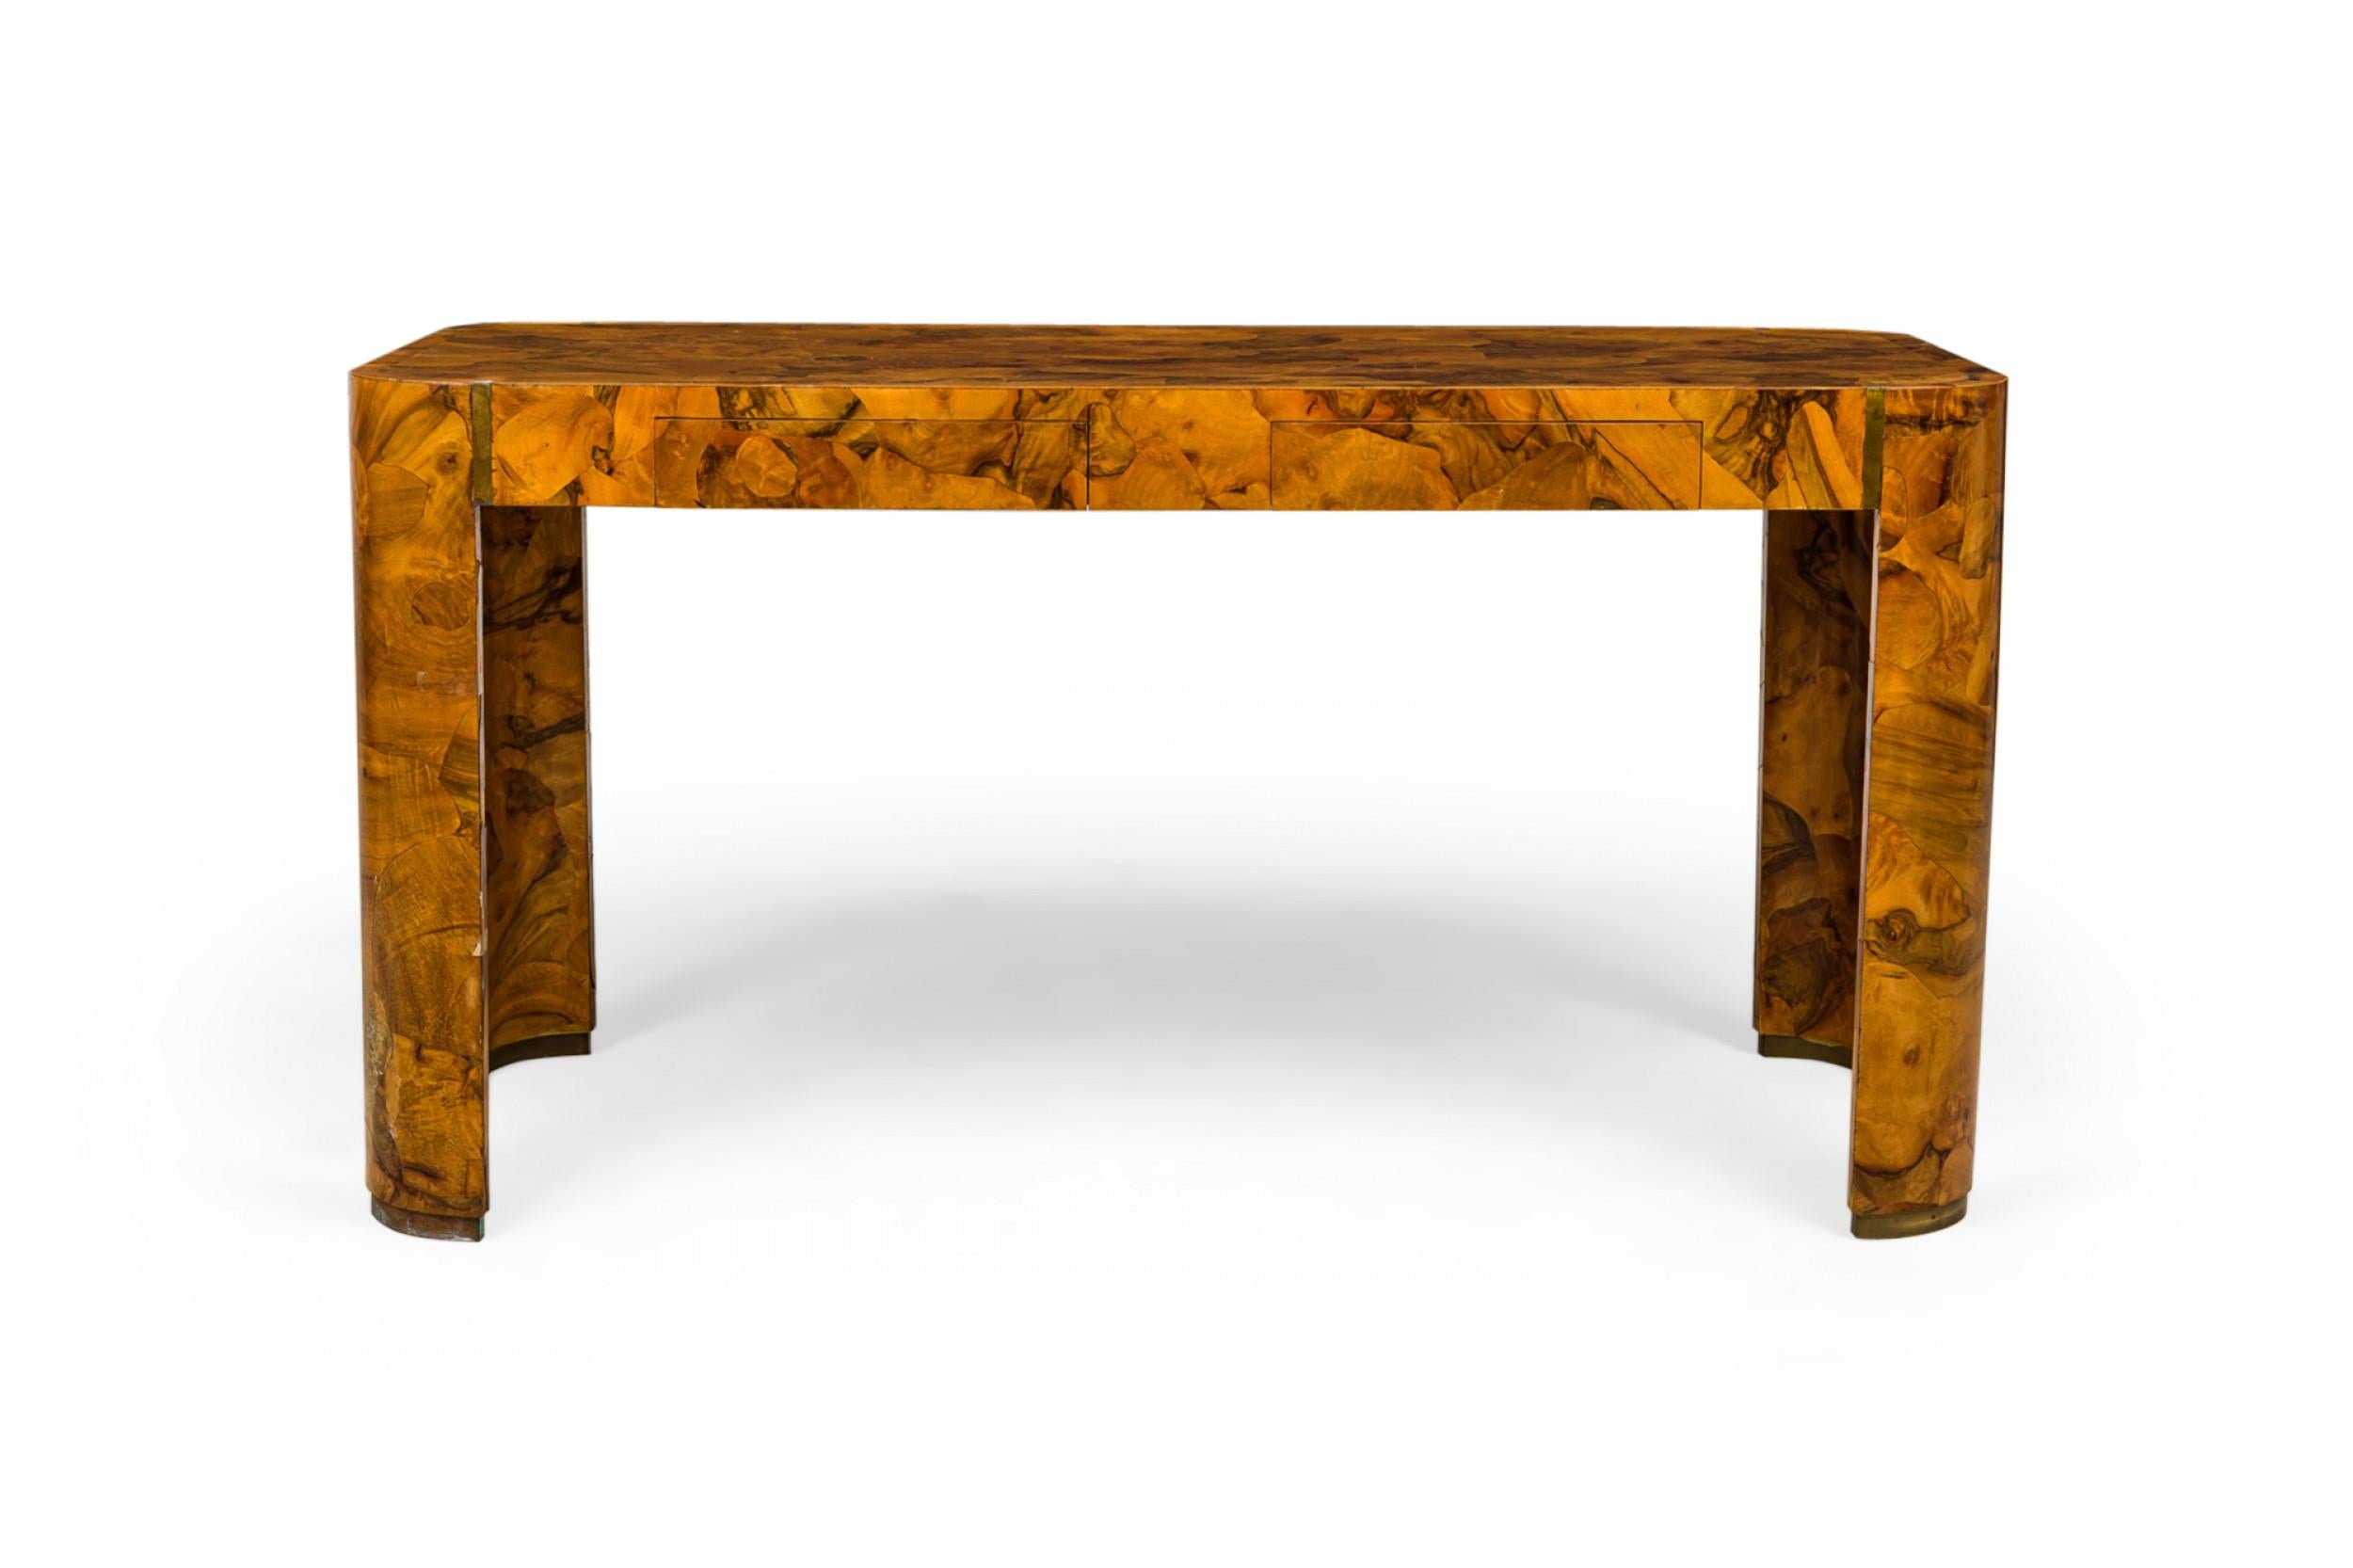 Italian Mid-Century 'Raidus' writing desk with a rectangular top with rounded edges and two drawers, finished in oyster burl veneer and resting on four rounded triangular legs.